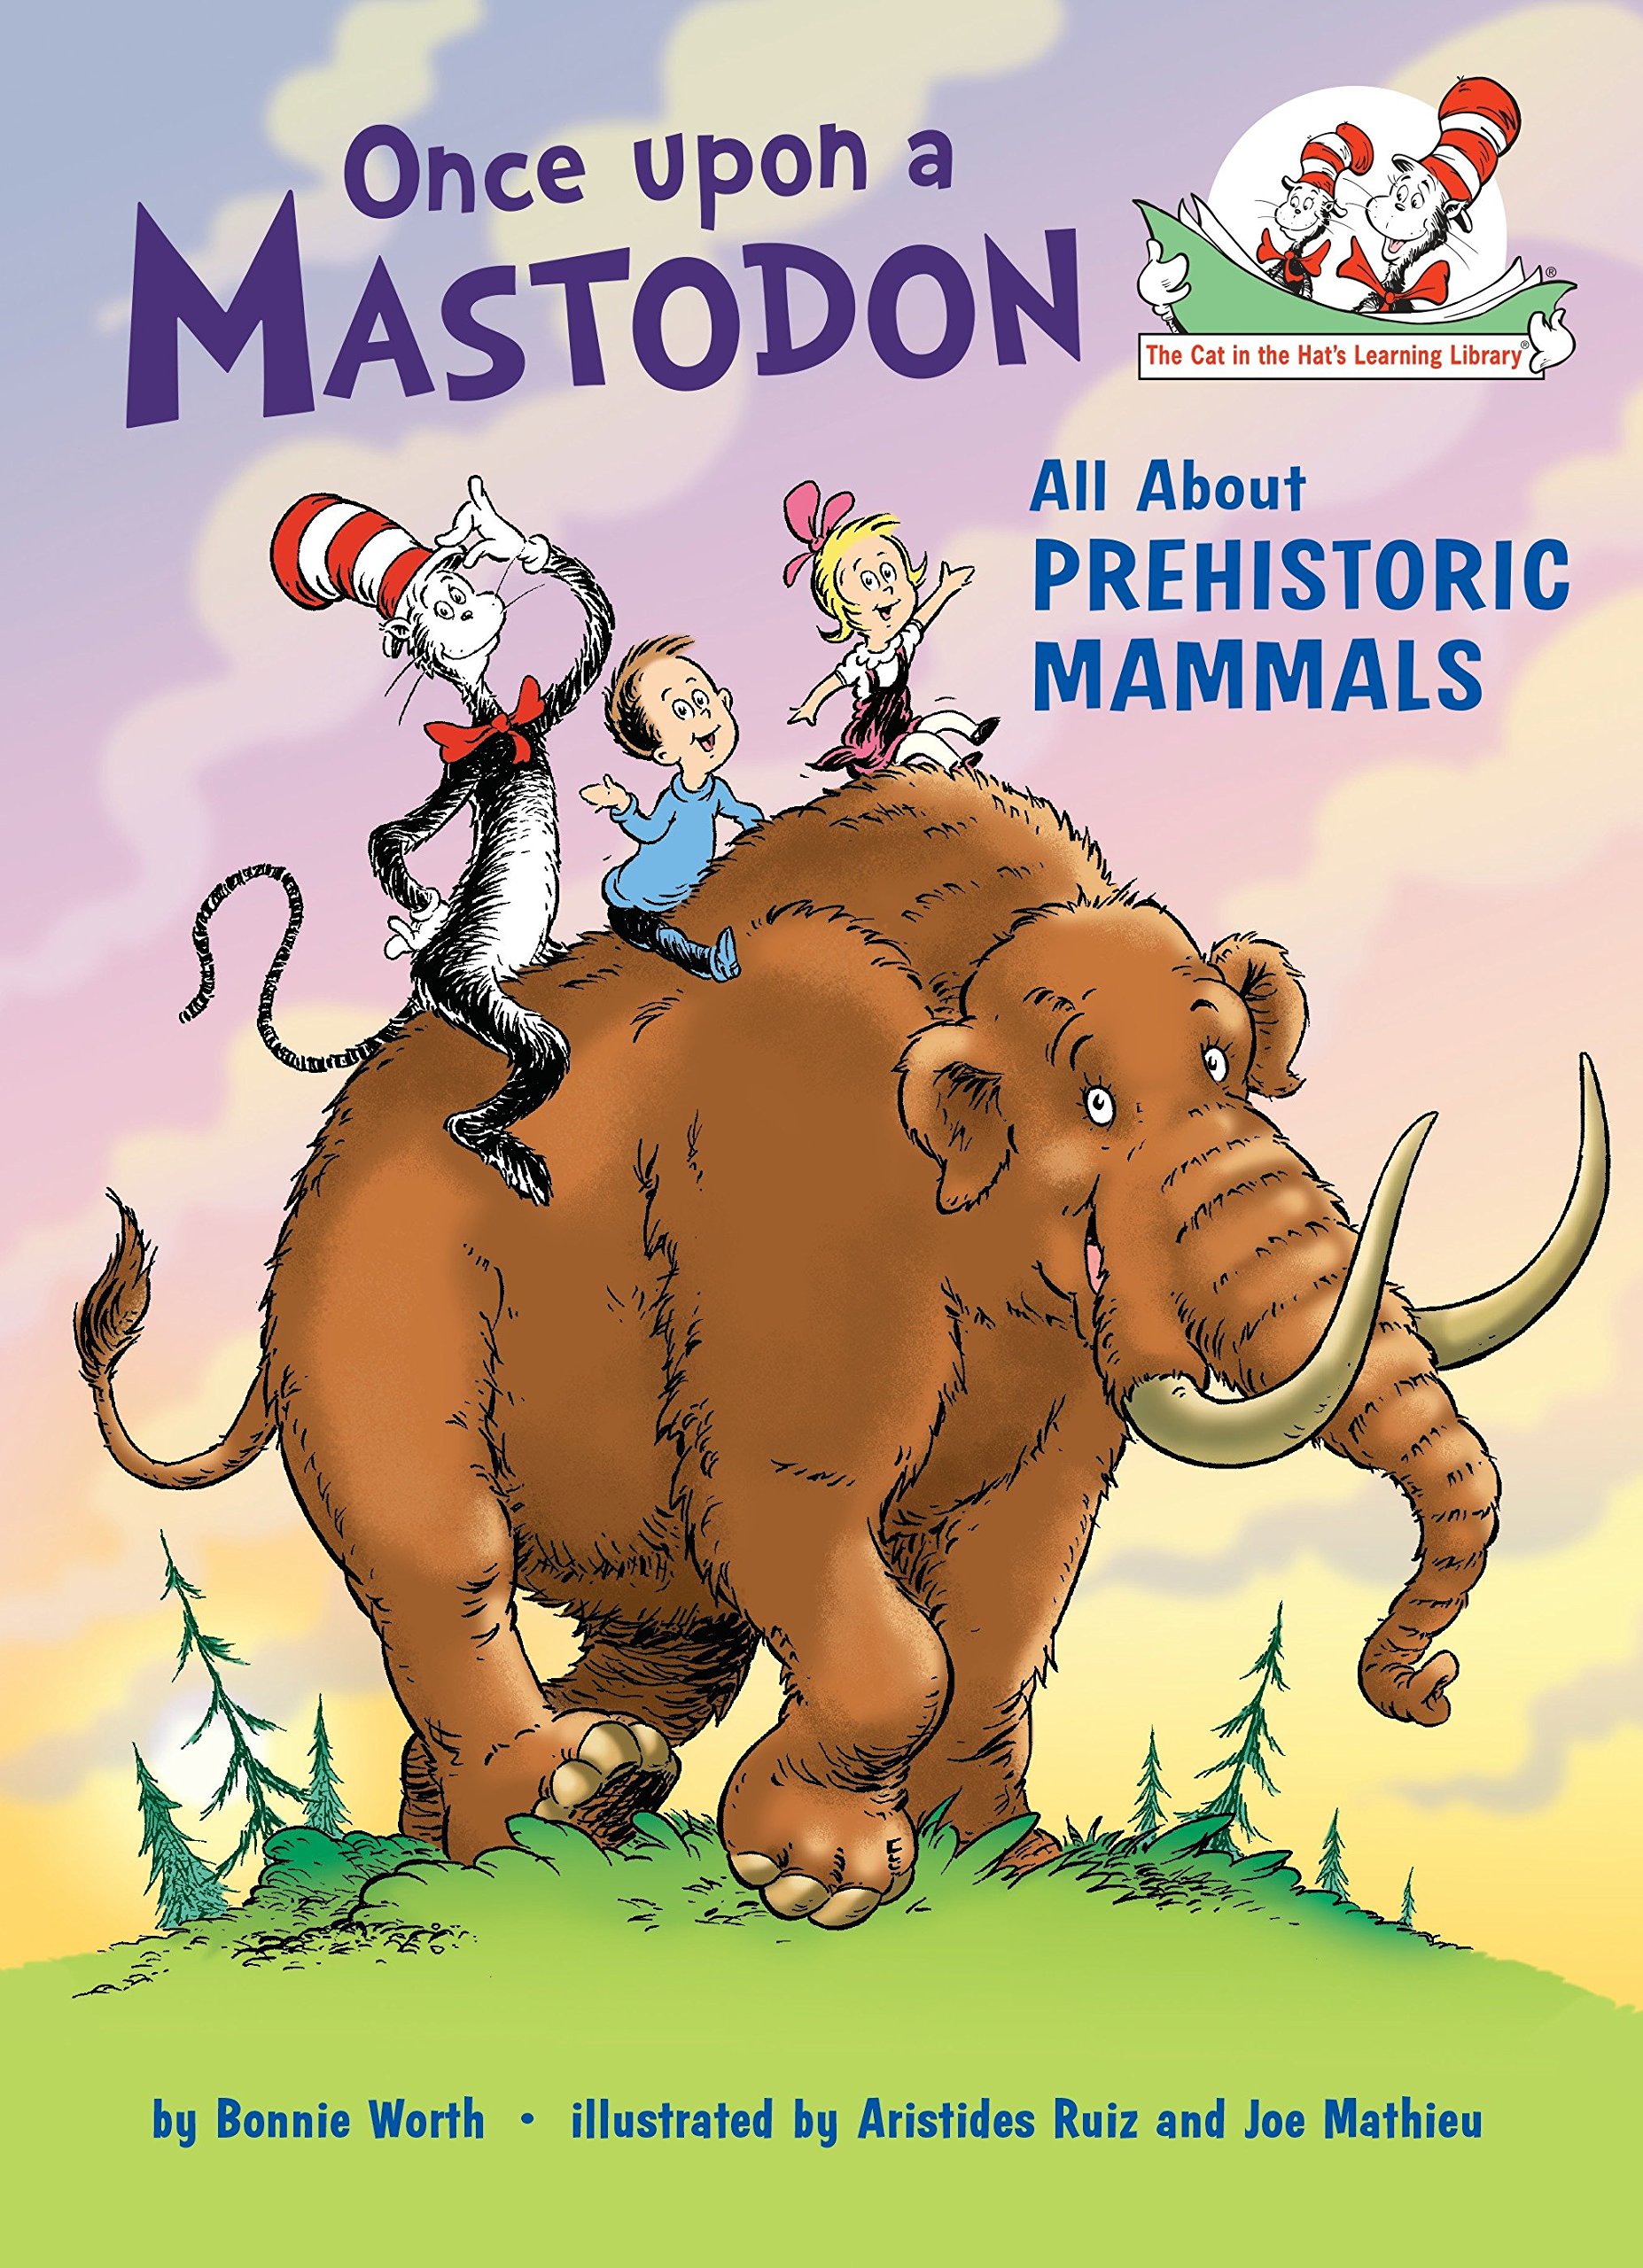 Once upon a Mastodon: All About Prehistoric Mammals (Hardback)